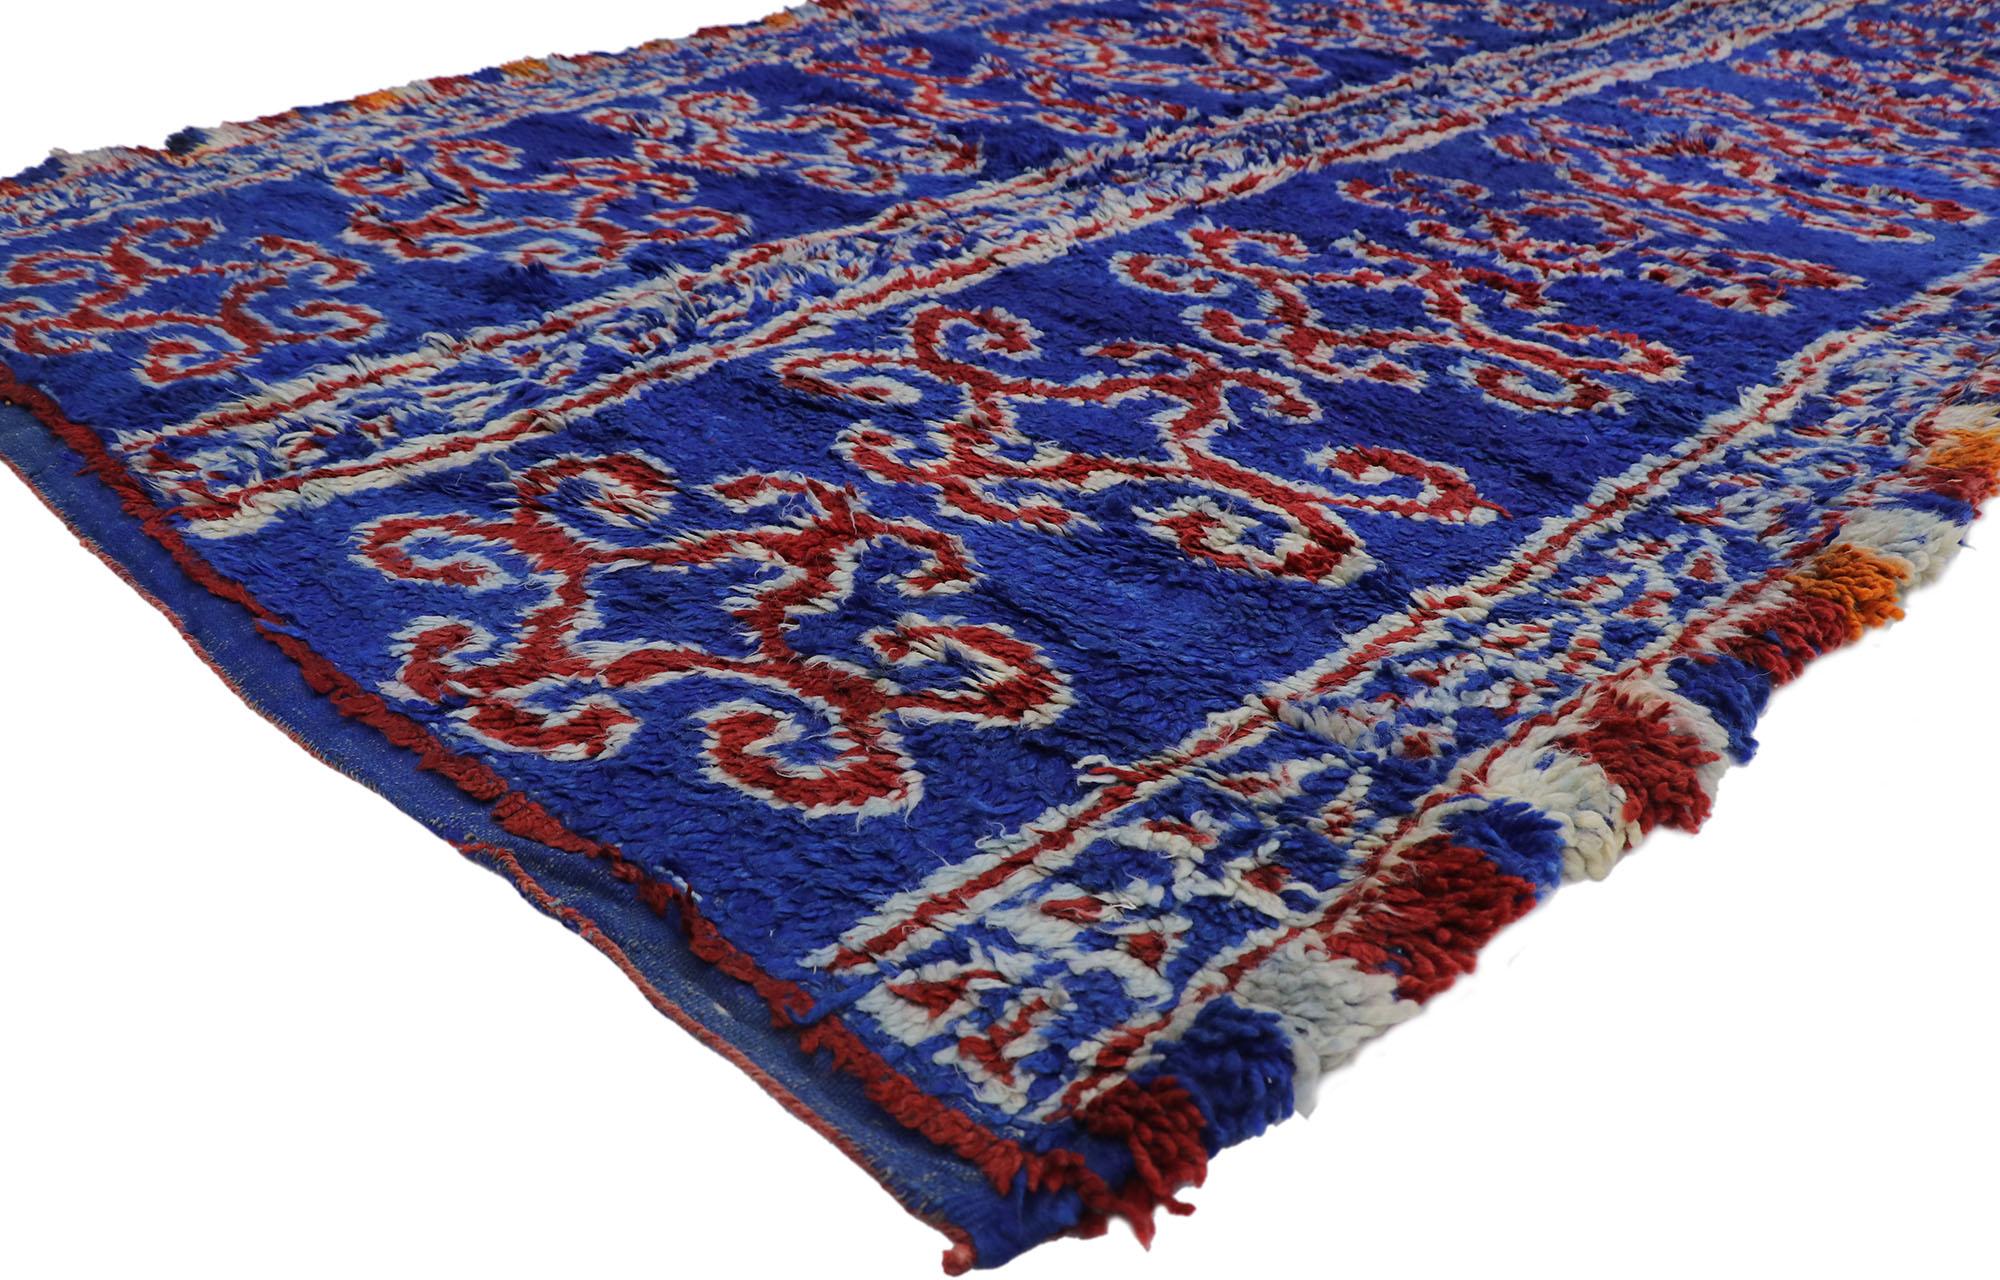 21205 vintage Berber blue Beni M'Guild Moroccan rug with Tribal style 06'06 x 11'09. Showcasing a bold expressive design, incredible detail and texture, this hand knotted wool vintage Berber Beni M'Guild Moroccan rug is a captivating vision of woven